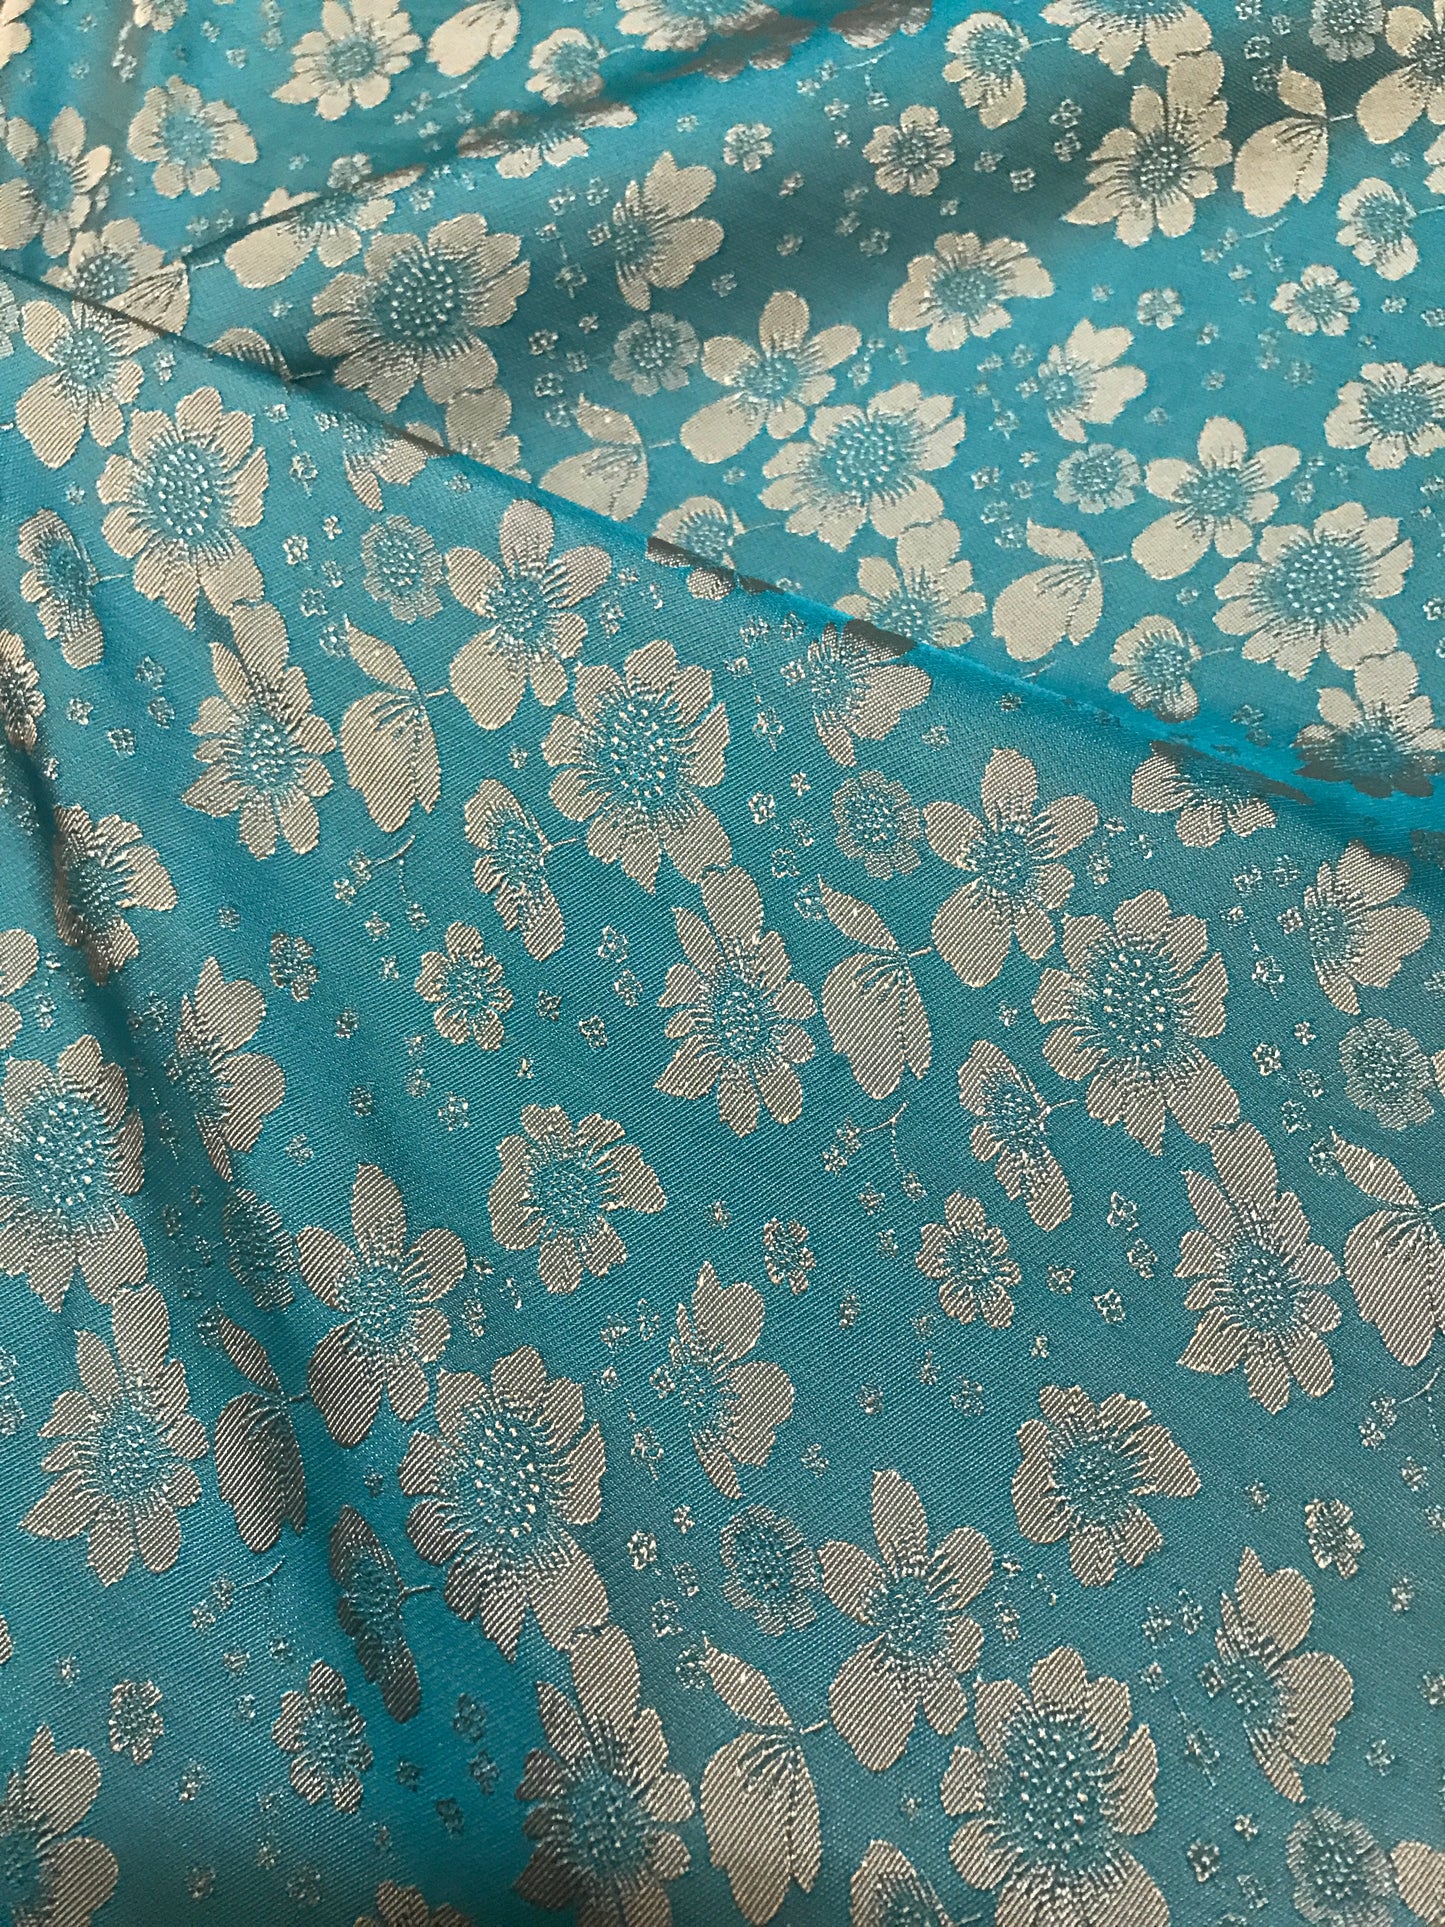 PURE MULBERRY SILK fabric by the yard - Blue silk with flowers - Floral Silk -Luxury Silk - Natural silk - Handmade in VietNam- Silk with Design